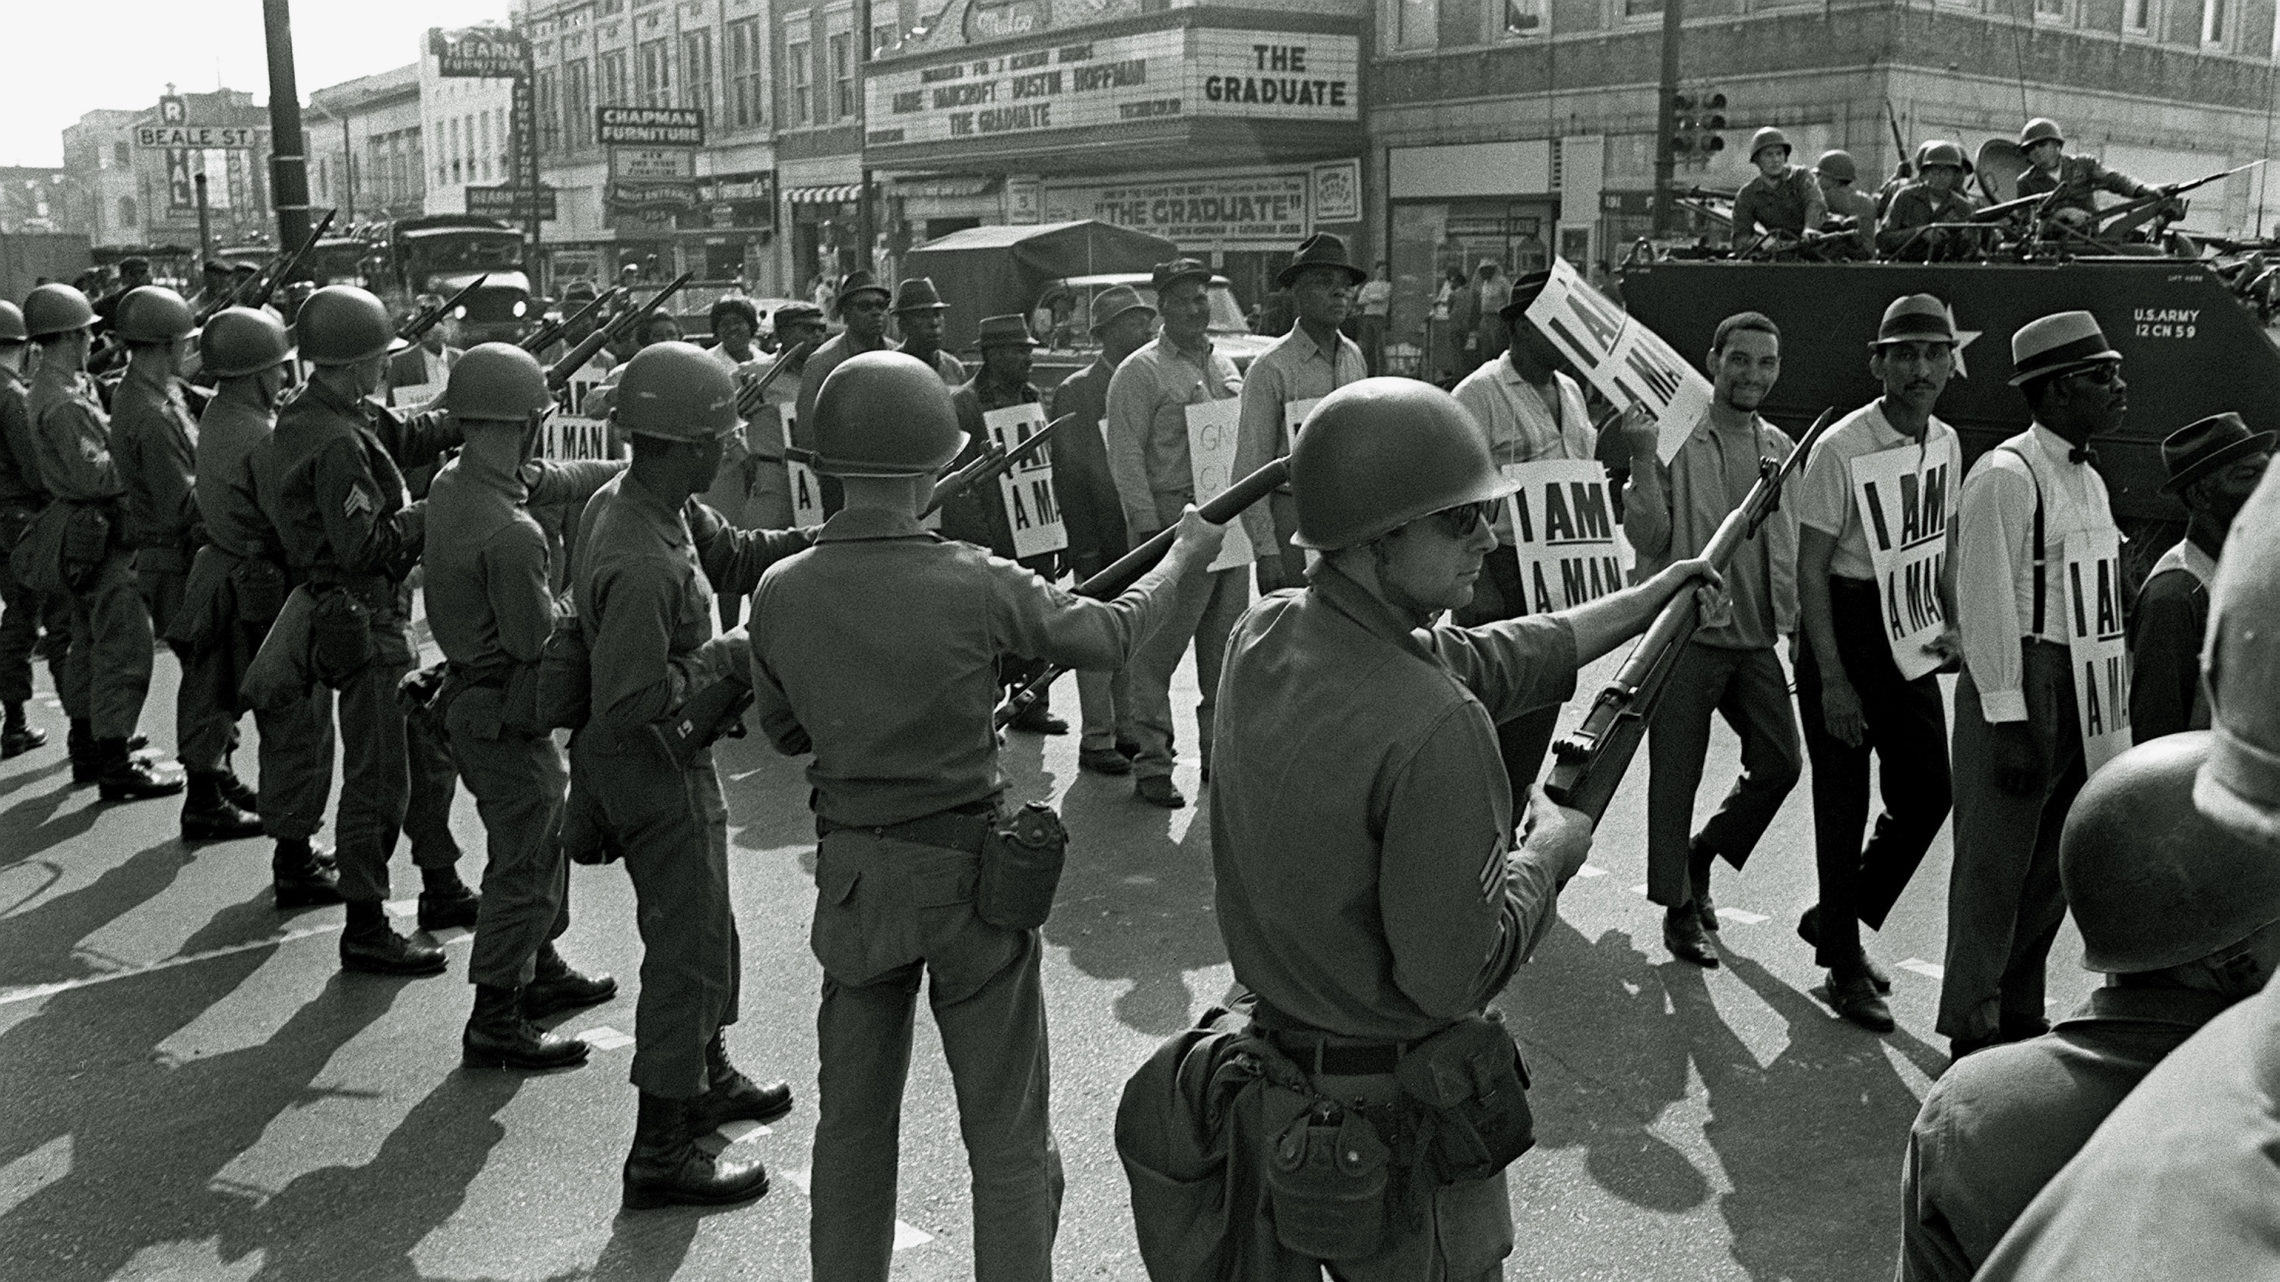 Striking sanitation workers and their supporters are flanked by bayonet-wielding National Guard troops and armored vehicles during a march on City Hall in Memphis, Tenn., on March 29, 1968, one day after a similar march erupted in violence, leaving one person dead and several injured. CREDIT: CHARLIE KELLY